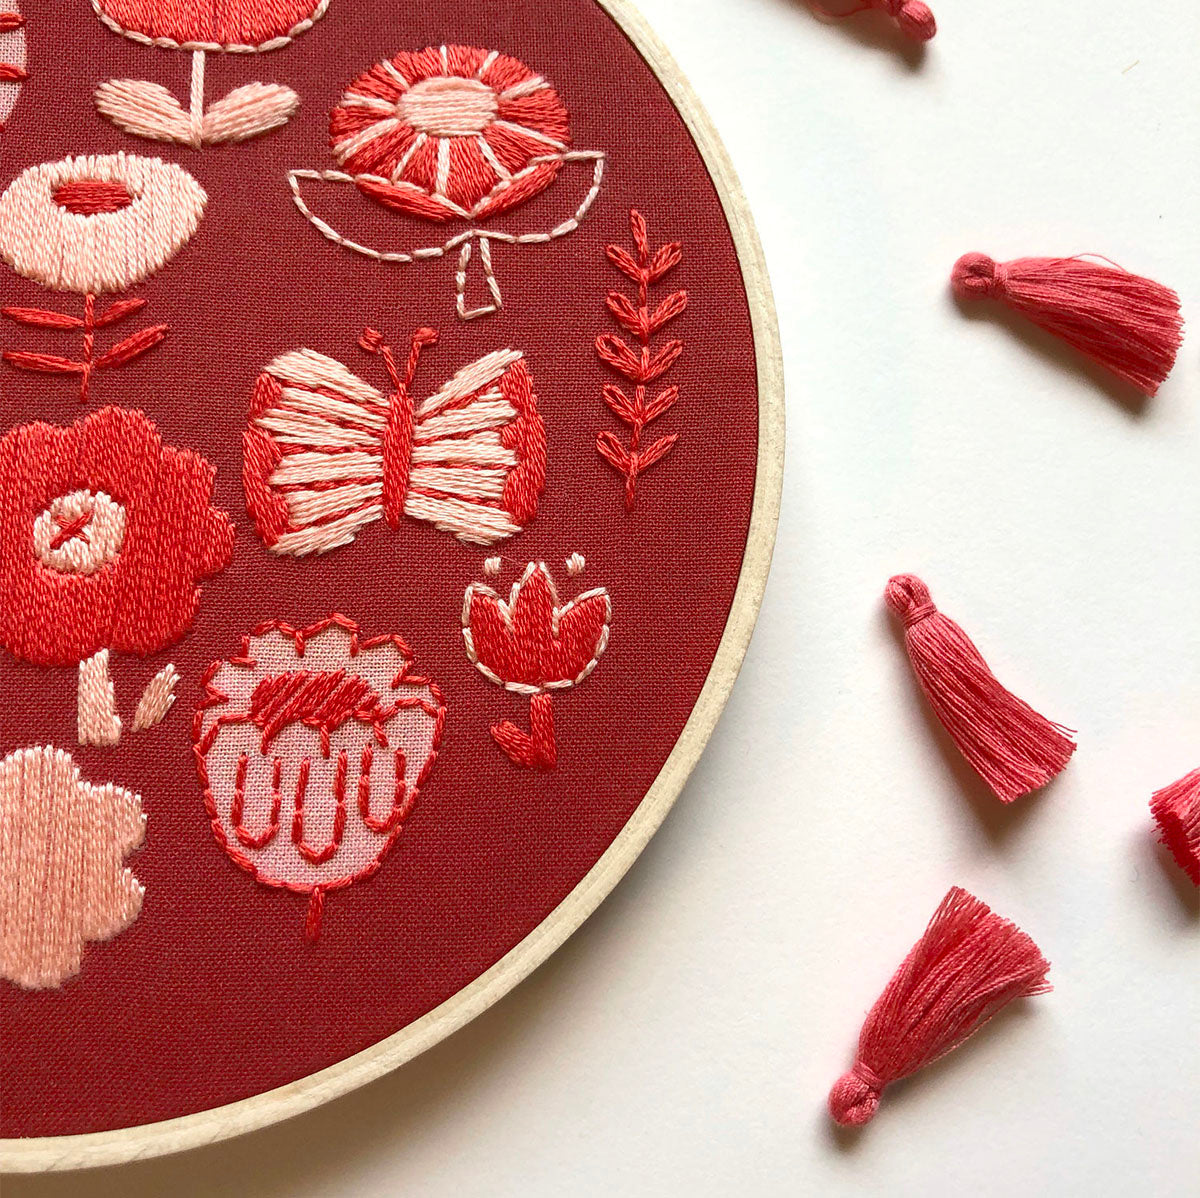 10 things to remember about hand embroidery needles - Stitch Floral